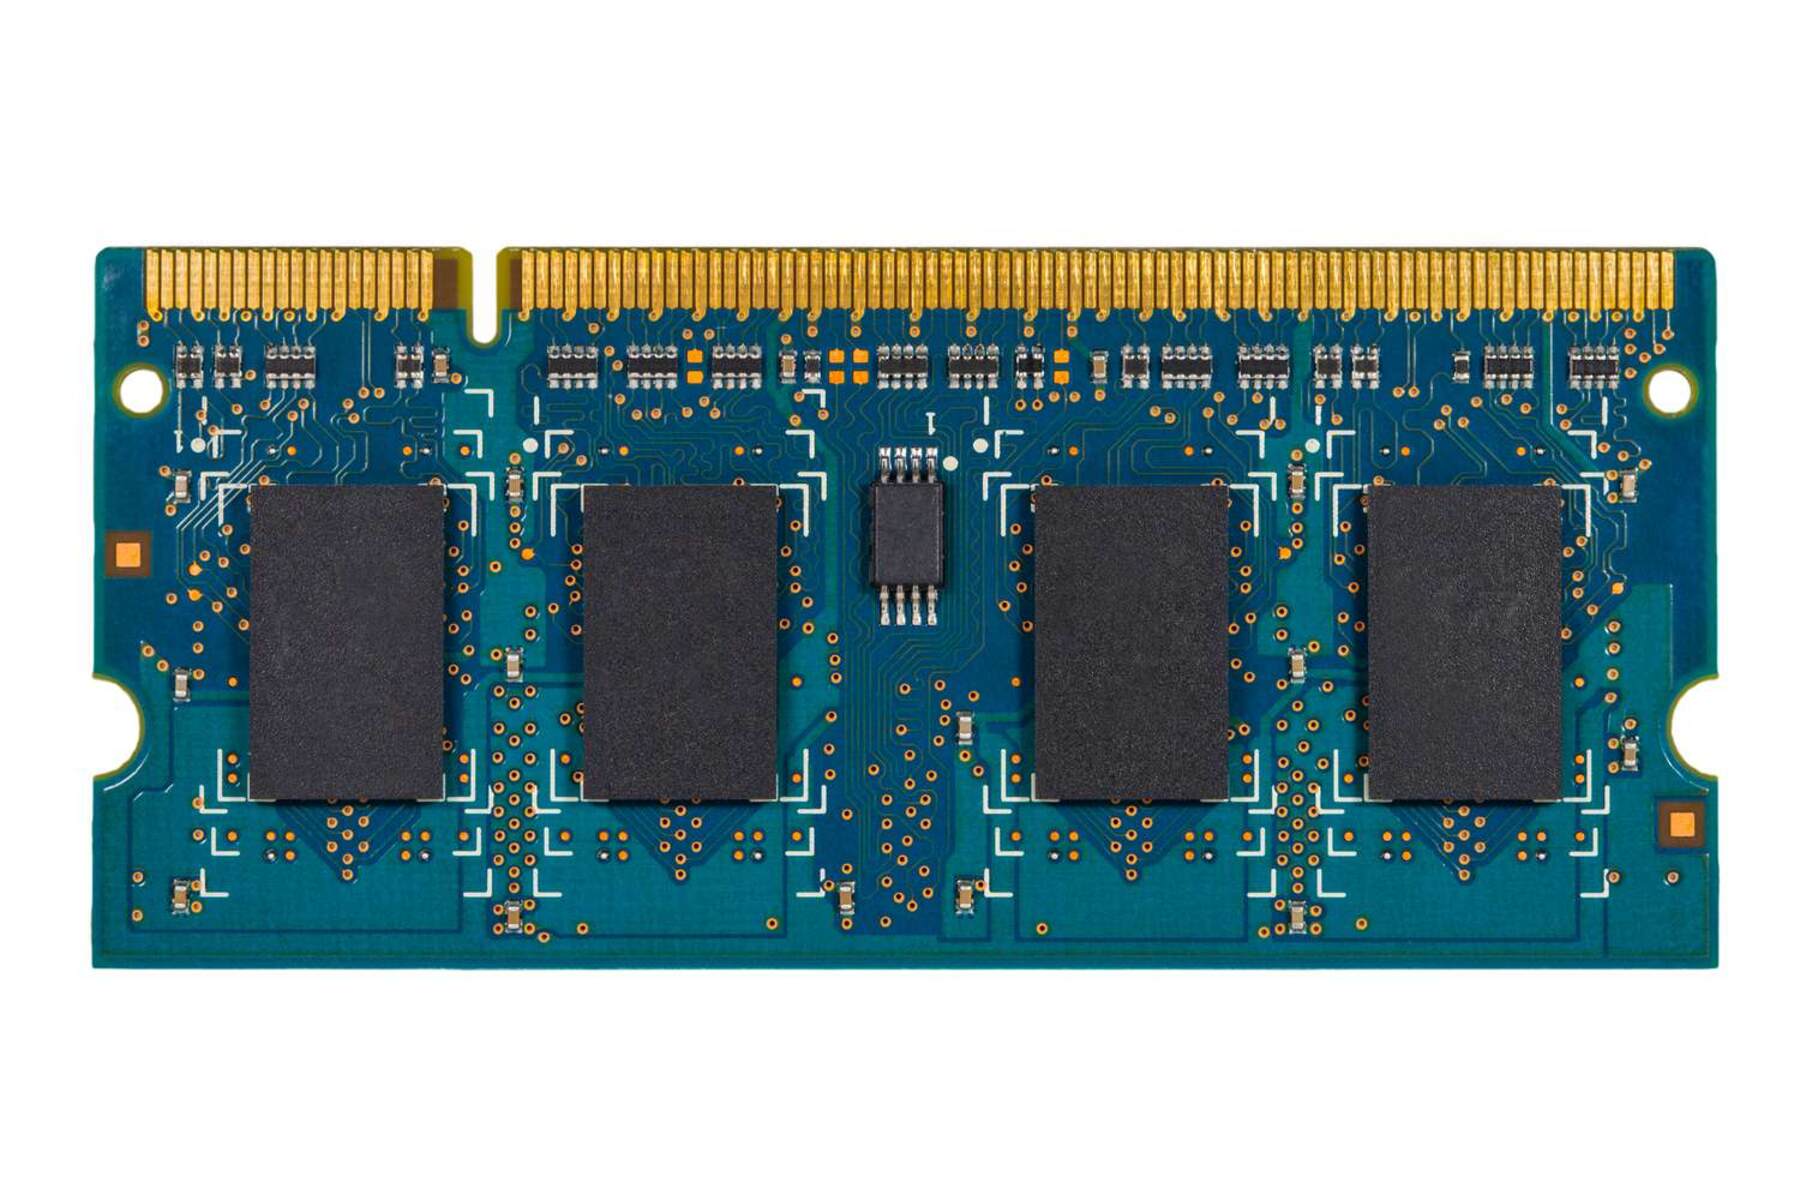 Which Two Factors Must Be Considered When Replacing Old RAM Modules In A PC